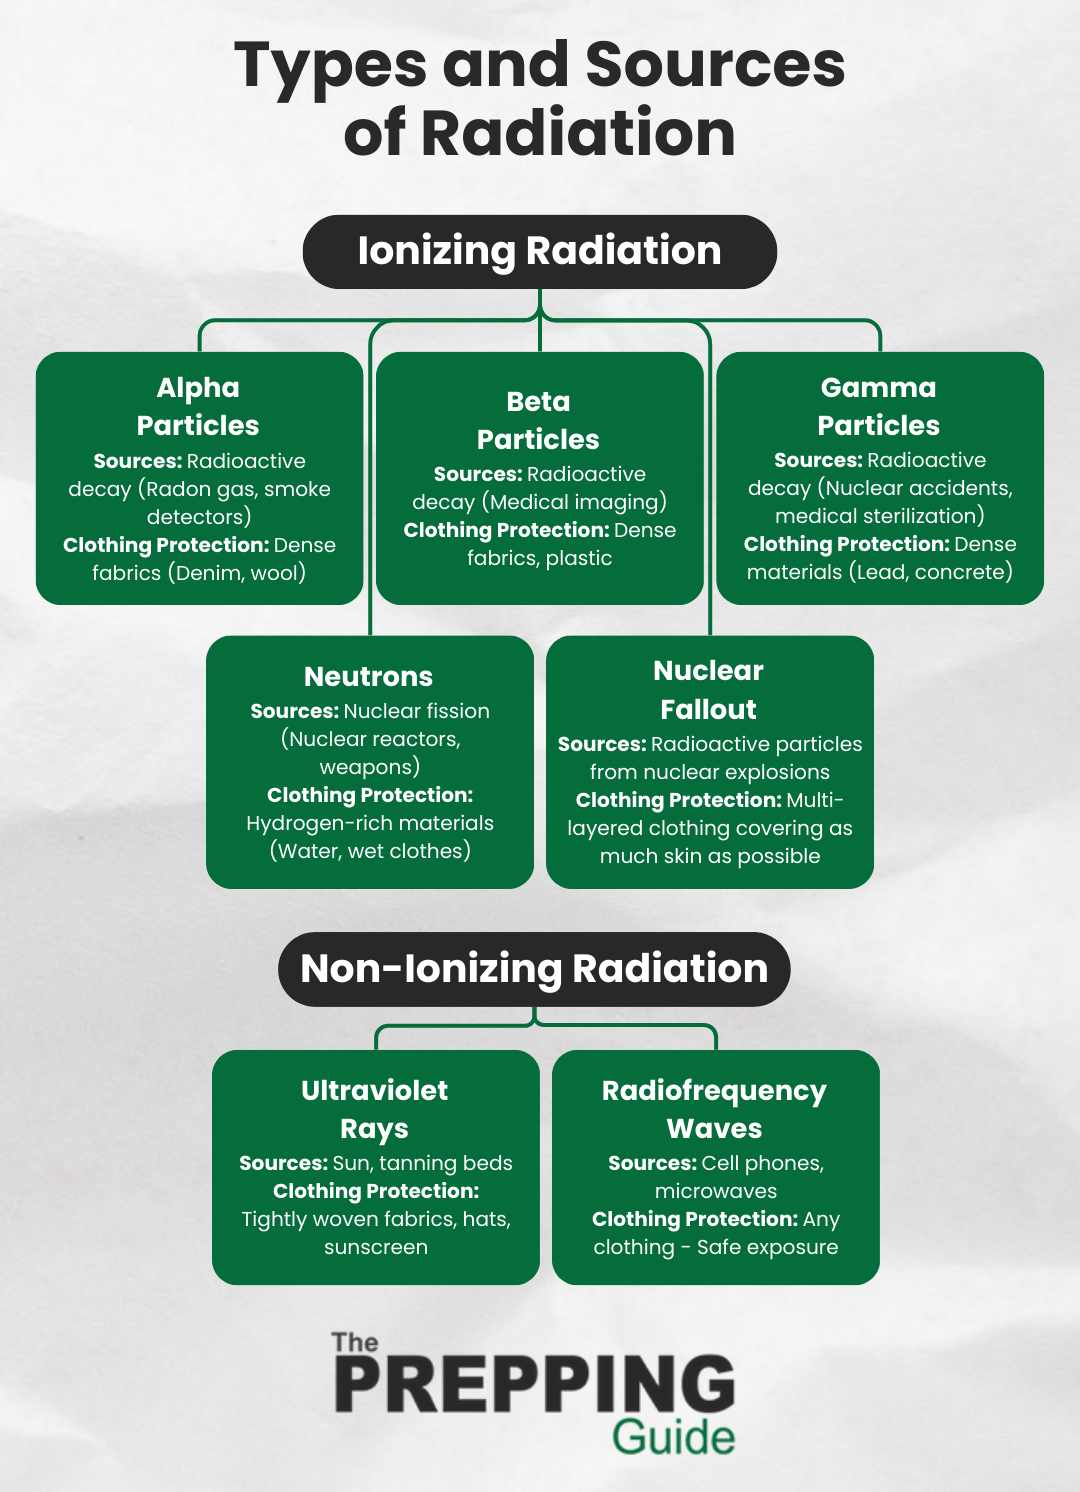 An infographic on the different types and sources of radiation.